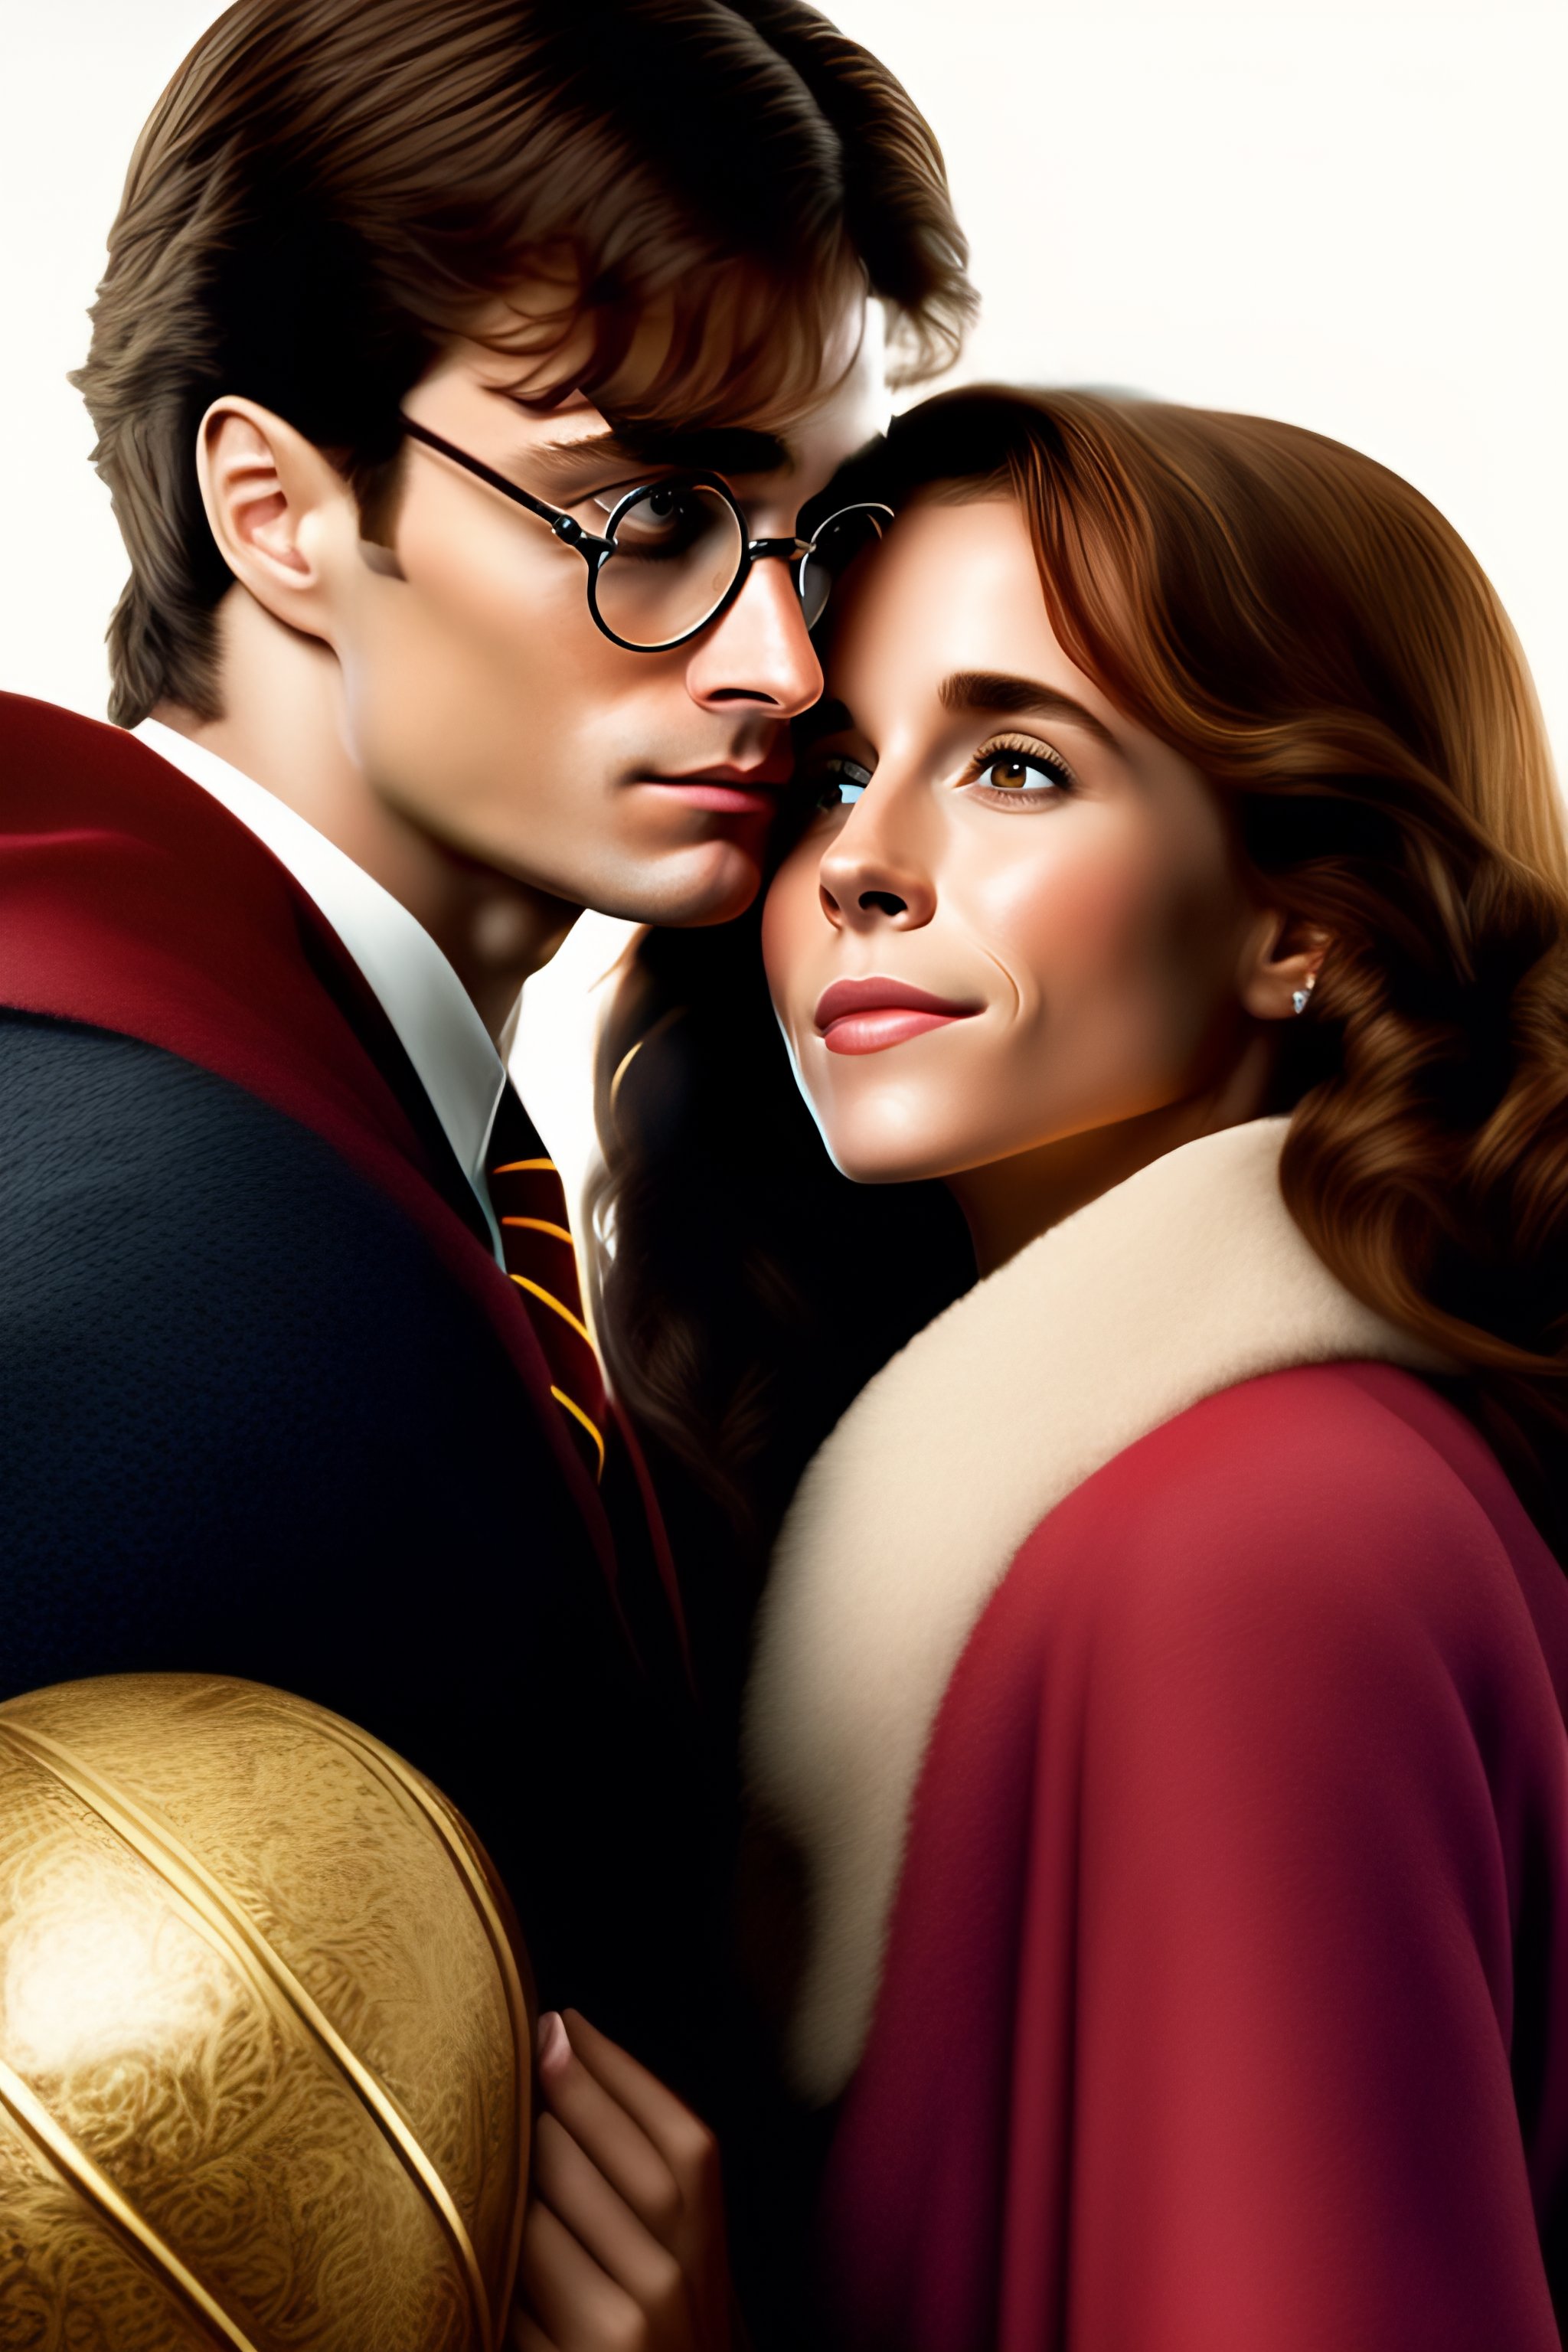 harry potter and hermione granger love story